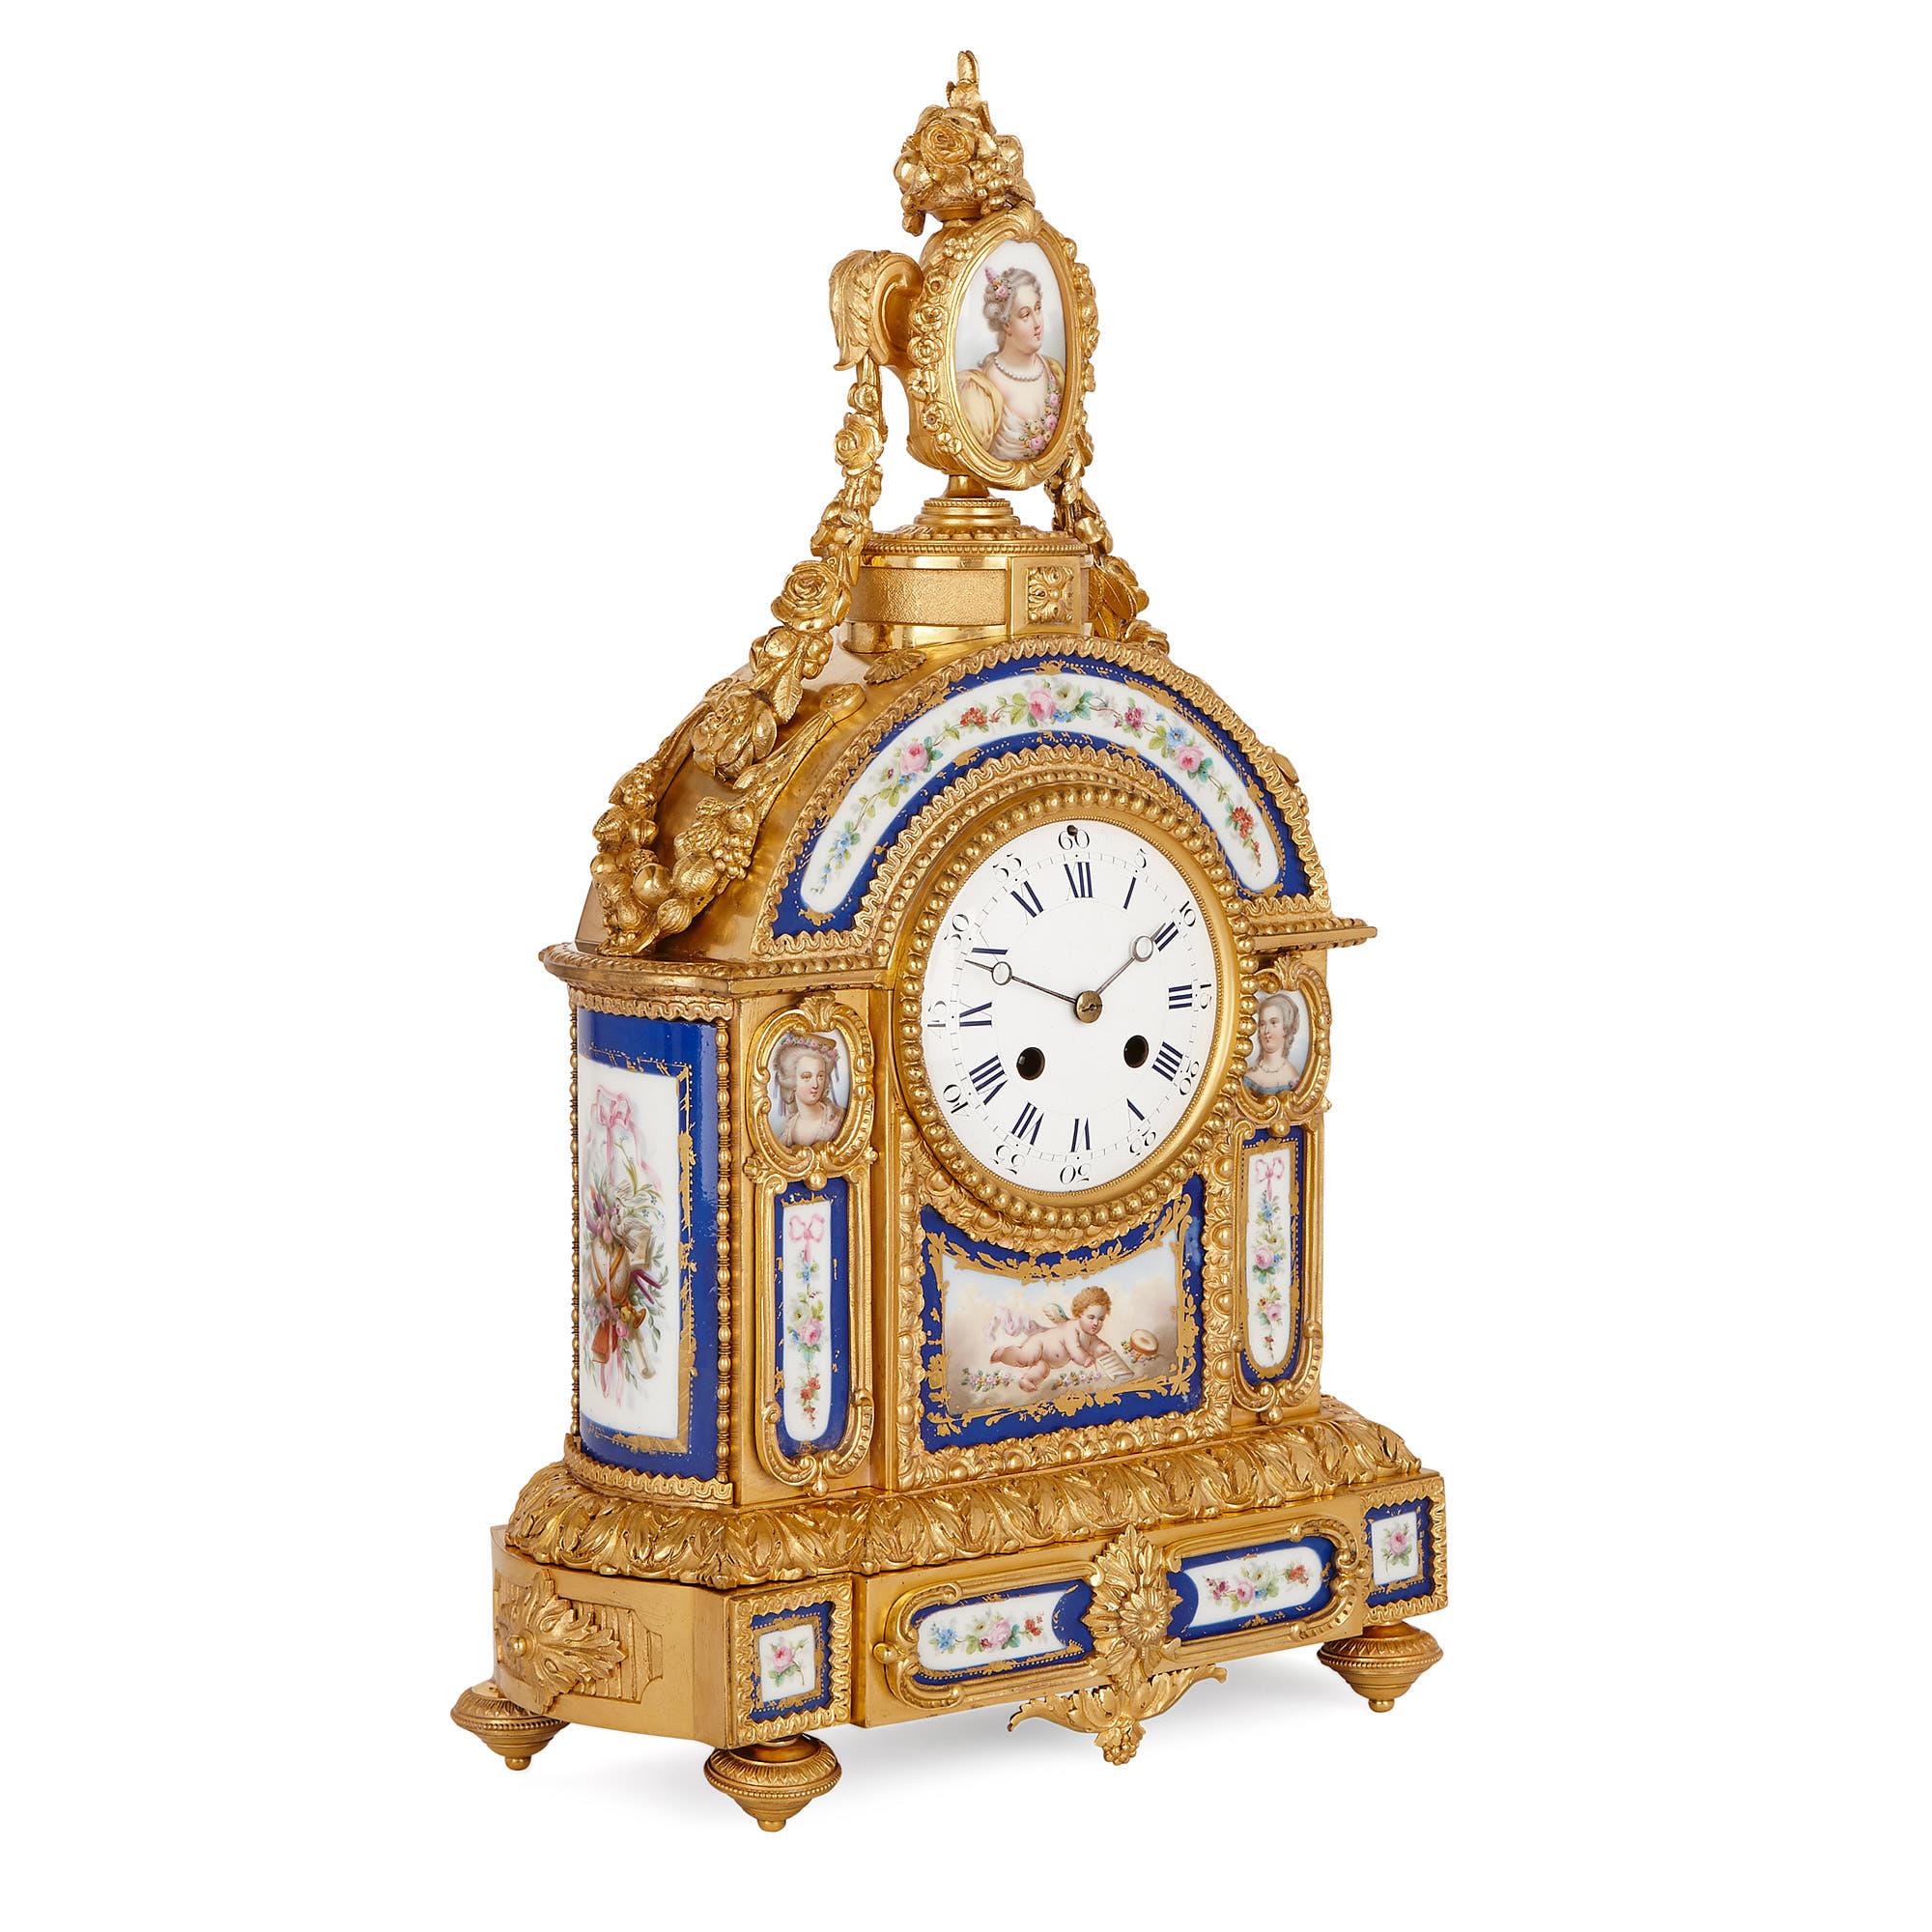 This Sèvres style clock is an elegant piece of late 19th century design, which will make a wonderful addition to a mantelpiece. It has been beautifully cast in bronze and gilded (ormolu), and set with intricately-painted porcelain panels. 

The